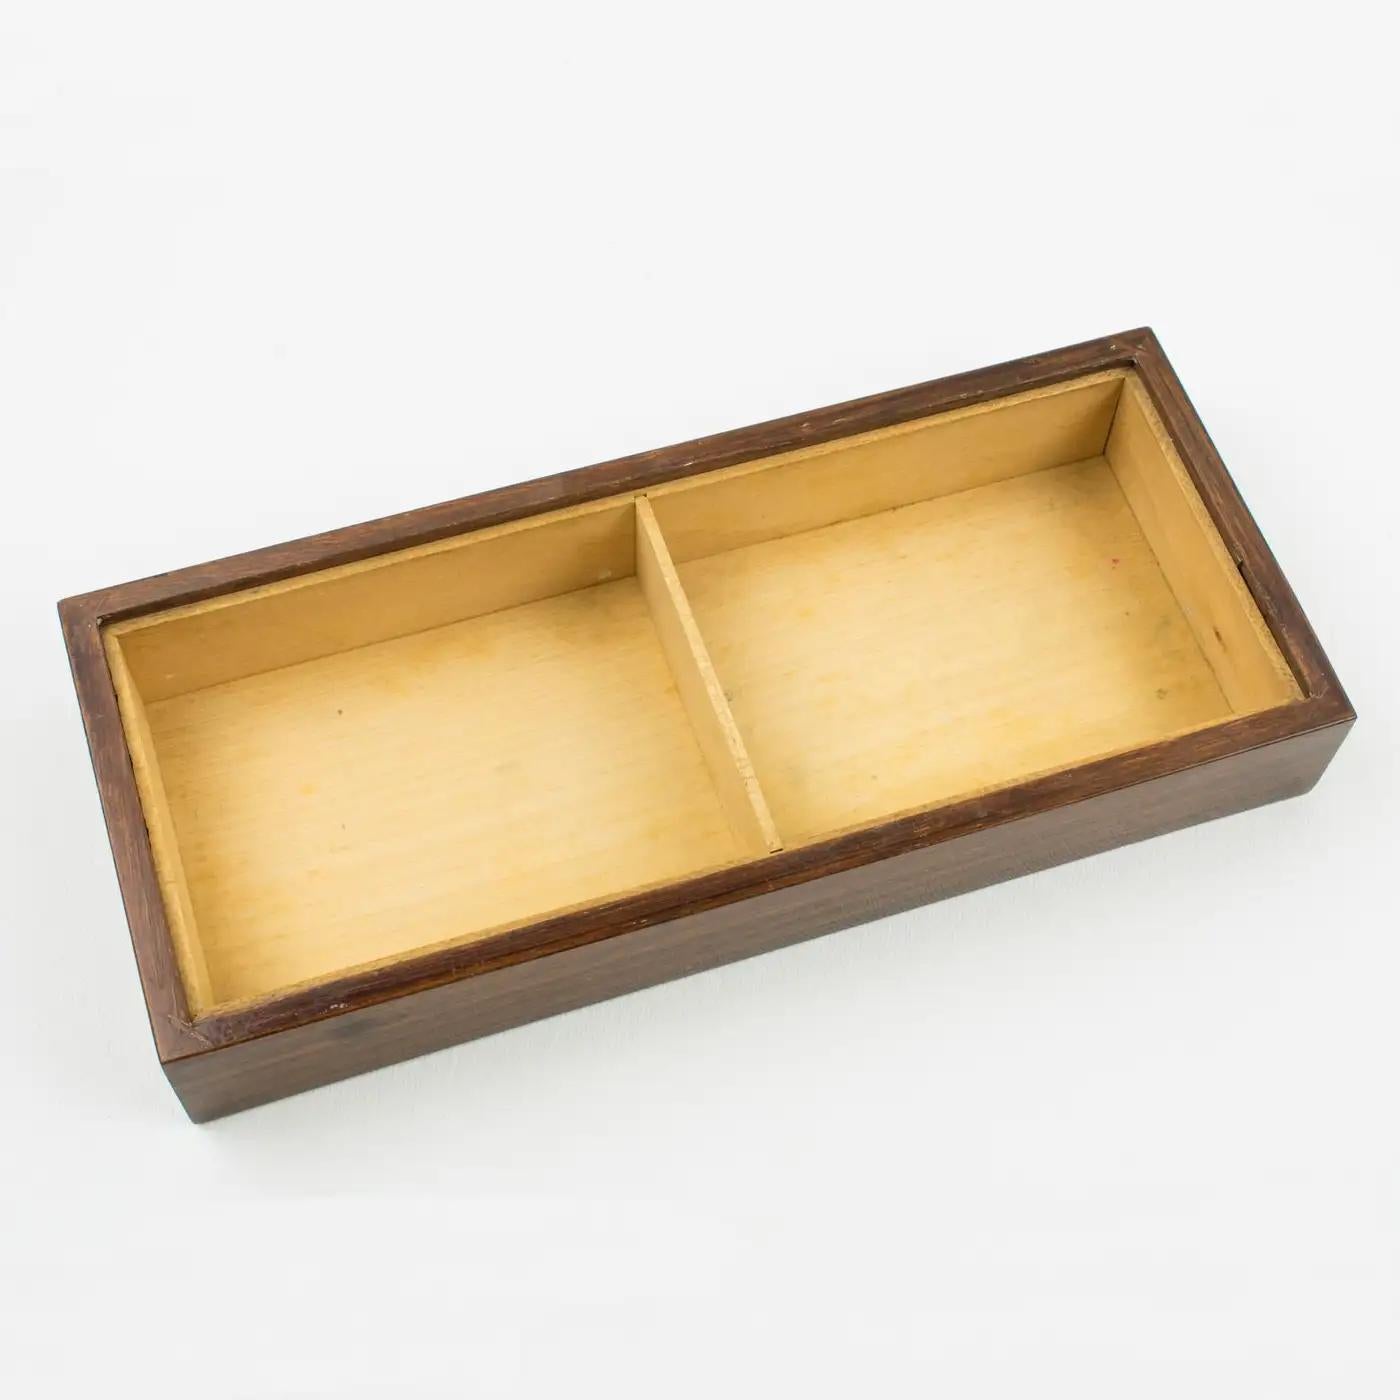 Metal Paolo De Poli Wood and Enamel Box, Italy 1950s For Sale